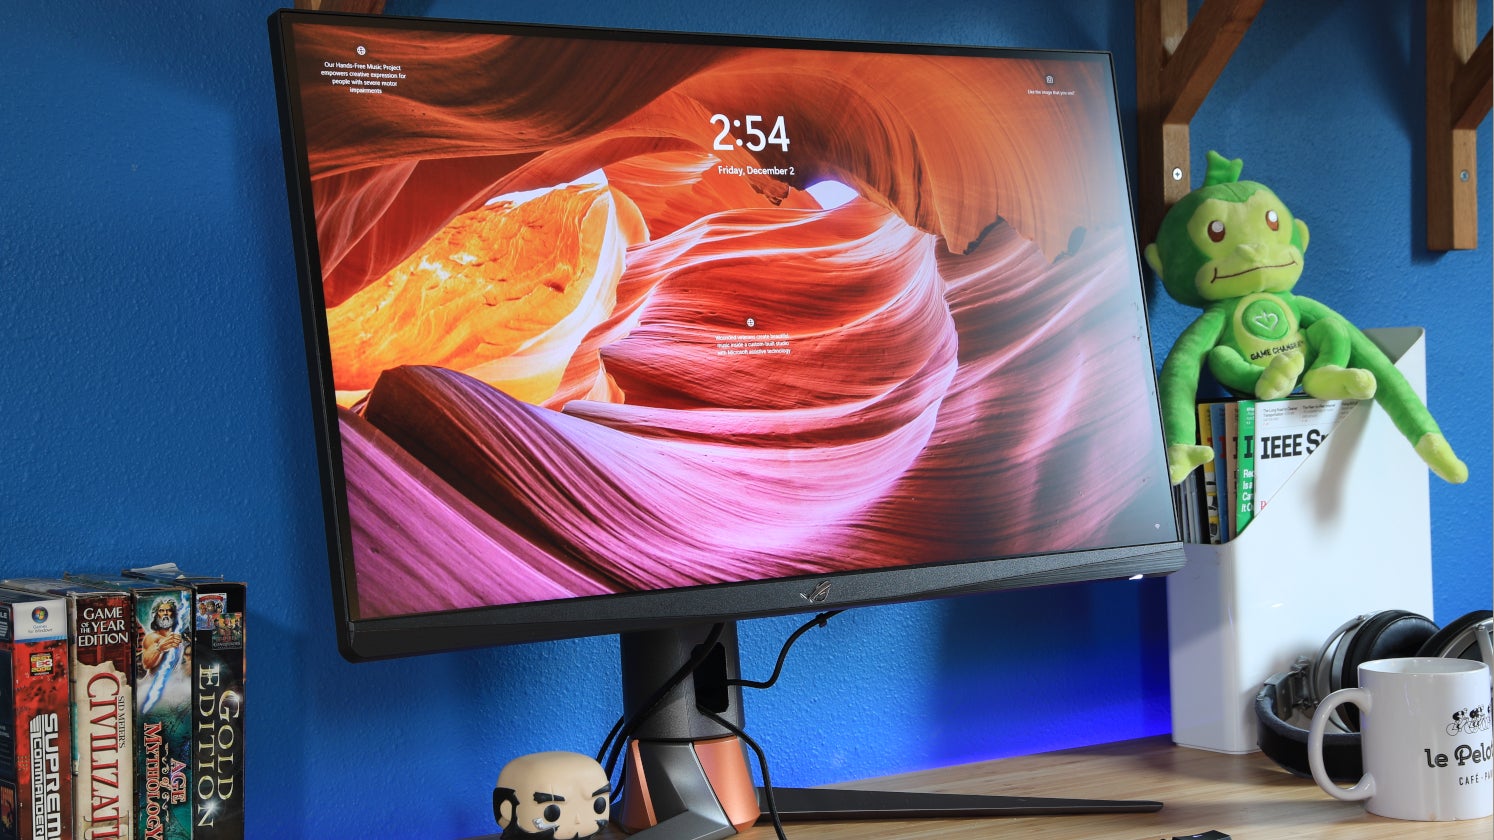 How To Reset An Asus Monitor